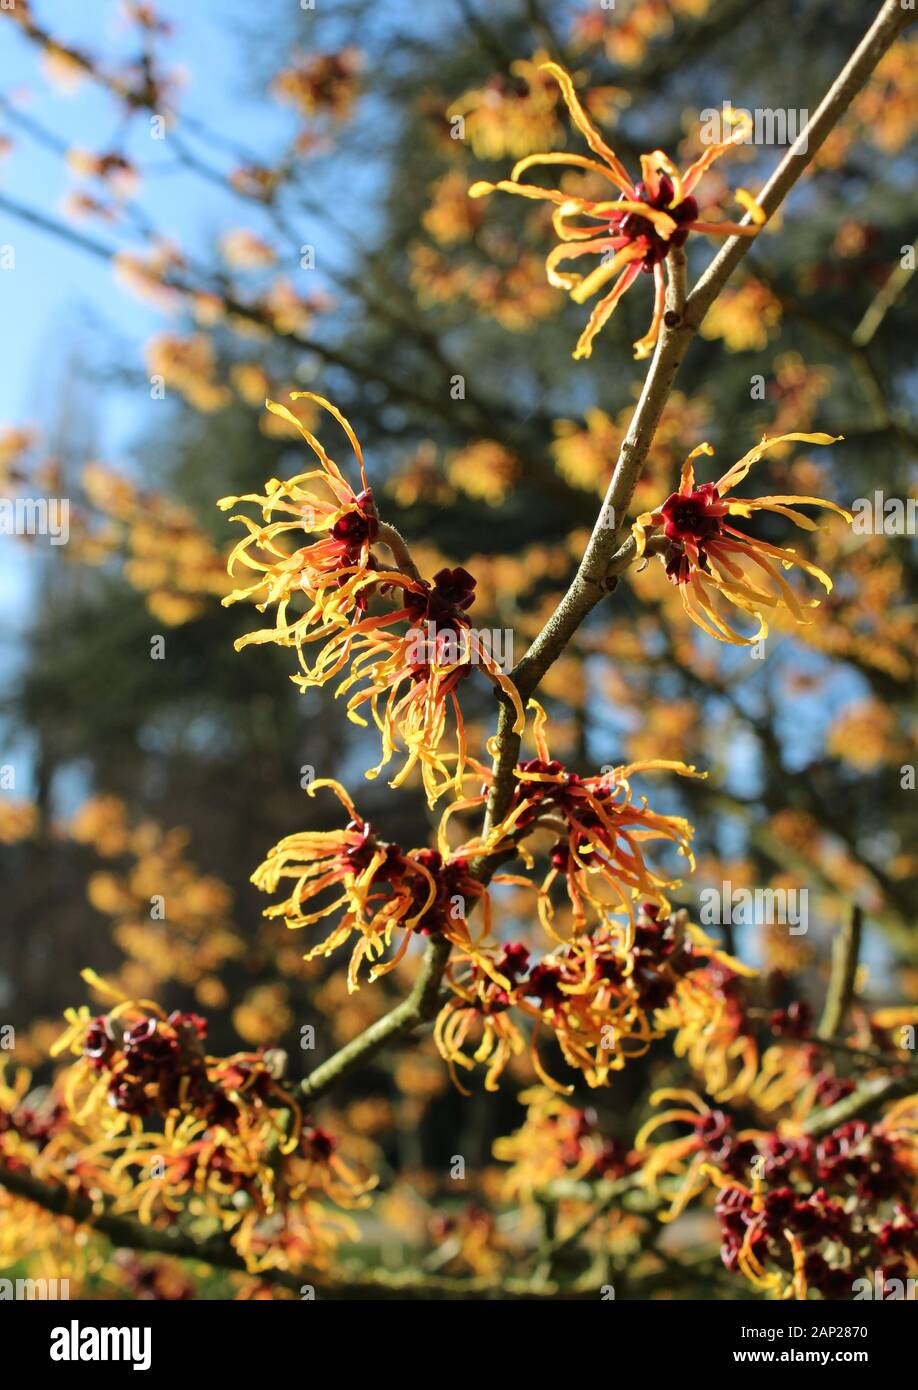 The sunlit flowers of Hamamelis mollis also known as Chinese Witch Hazel, a winter flowering shrub native to China. In a natural outdoor setting, with Stock Photo